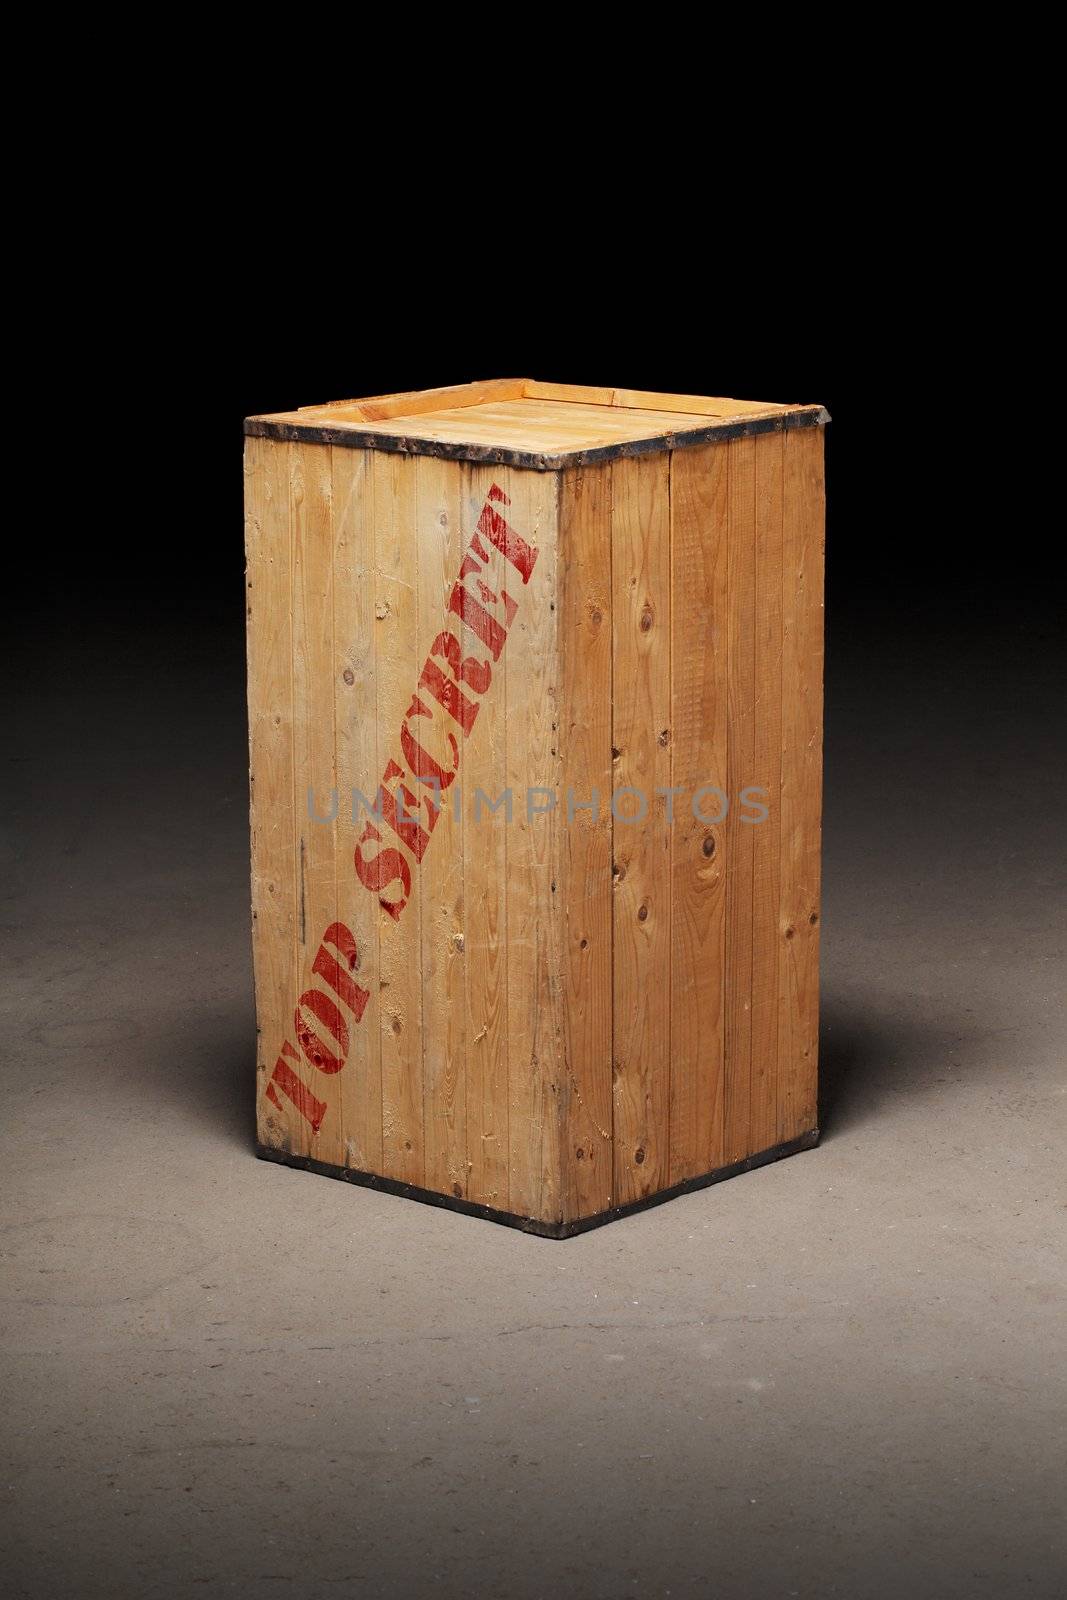 Old wooden crate with text "Top Secret" on dirty concrete floor.